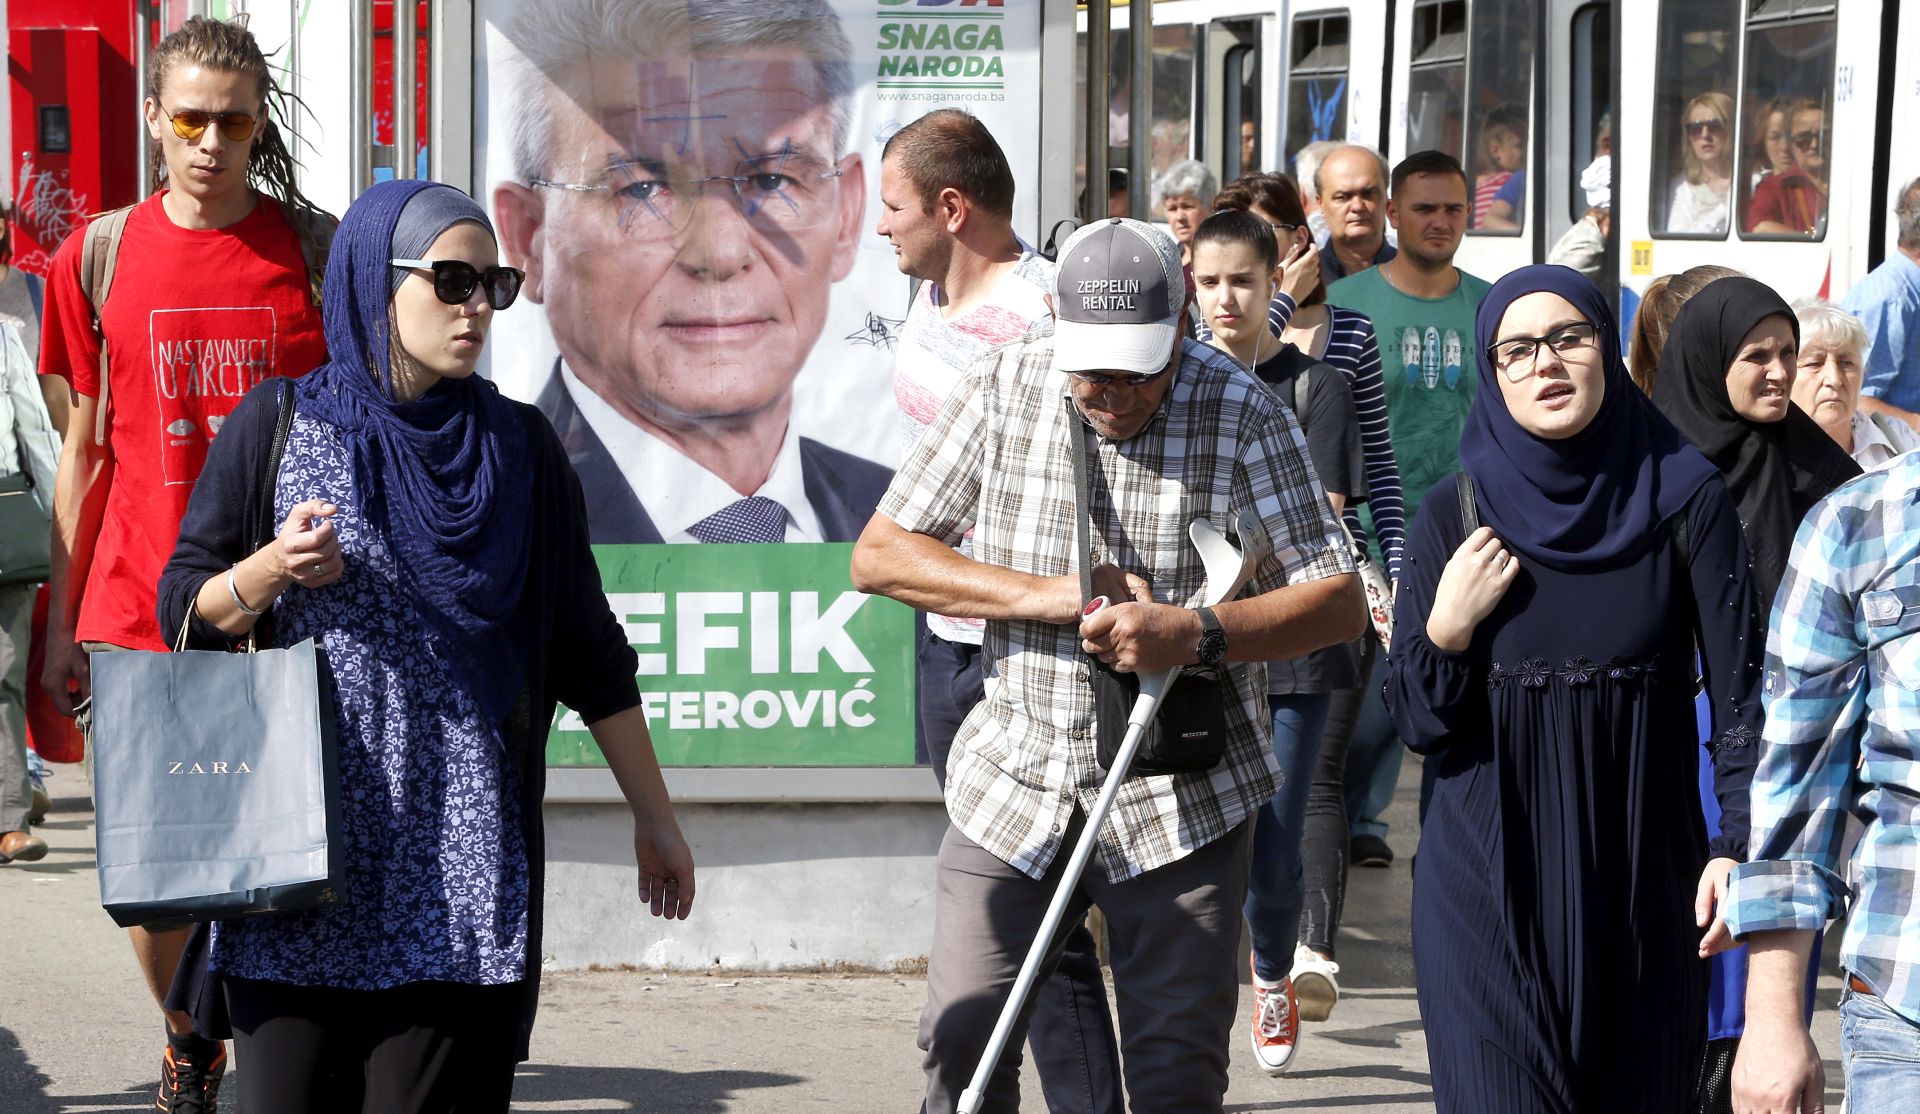 epa07031905 Election posters in Sarajevo, Bosnia, 19 September 2018. Reoprts state that on 07 October 2018, more than three million Bosnian citizens are expected to vote in the country's general elections and decide on a path for the future of Bosnia. In the eighth elections in Bosnia, 72 political parties and 15 candidates for the three members of the Bosnian Presidency were registered.  EPA/FEHIM DEMIR